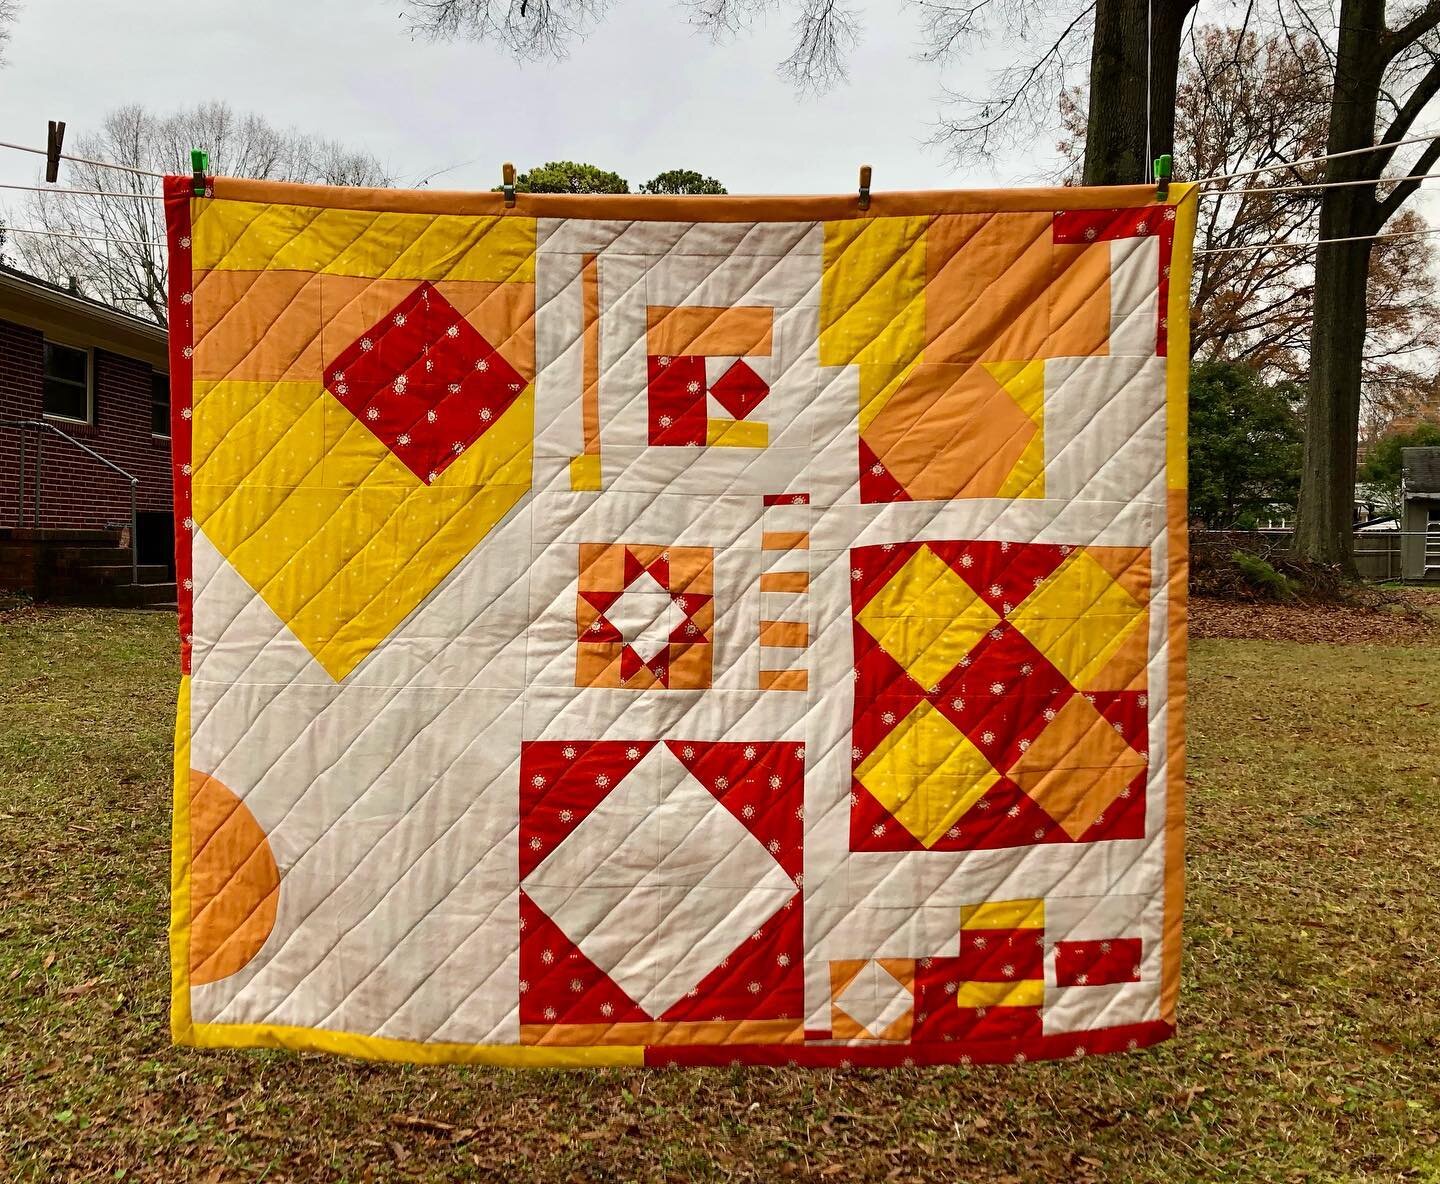 I&rsquo;m just so thrilled with how this little quilt for Reed turned out. I was inspired by @graceebrian&rsquo;s little quilted letters and wanted to make an interactive alphabet quilt for Reed. I ended up making the &ldquo;back&rdquo; much more det